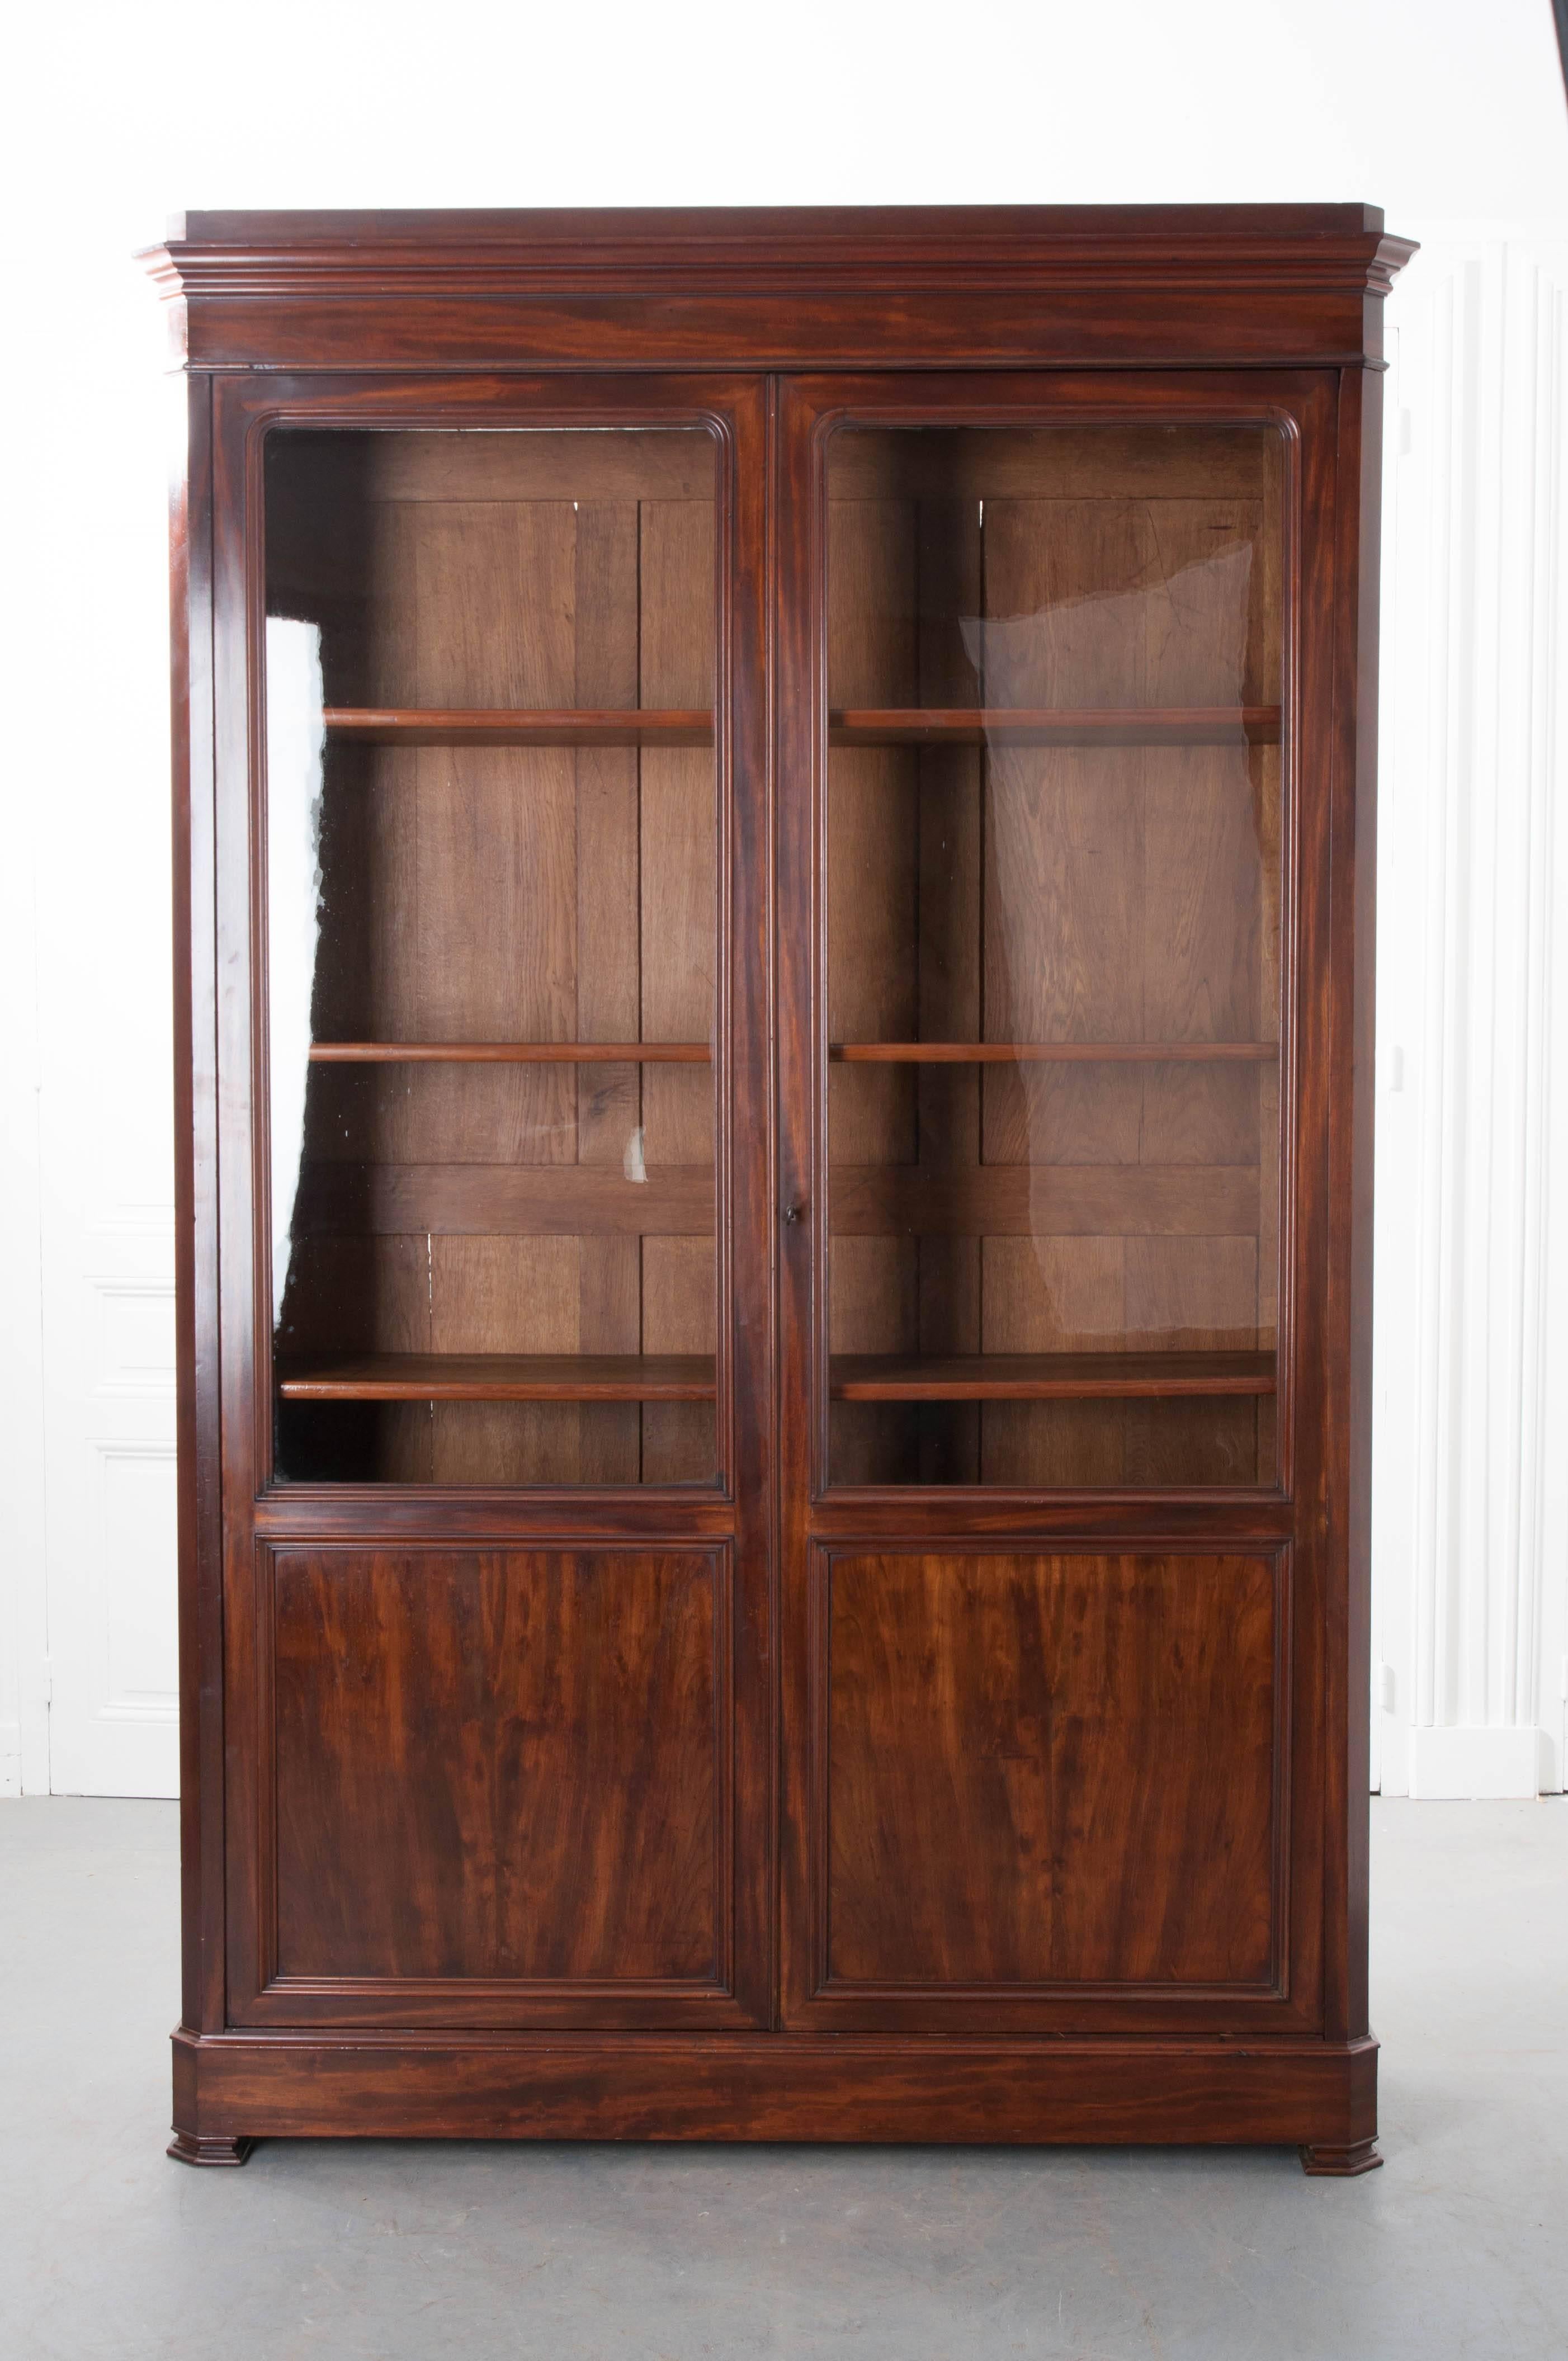 A handsome French Louis Philippe bibliothèque, made of mahogany, from the latter part of the 19th century. The bookcase has two glass front doors, which can be locked, that close before the antique's interior. The doors have large windows that have